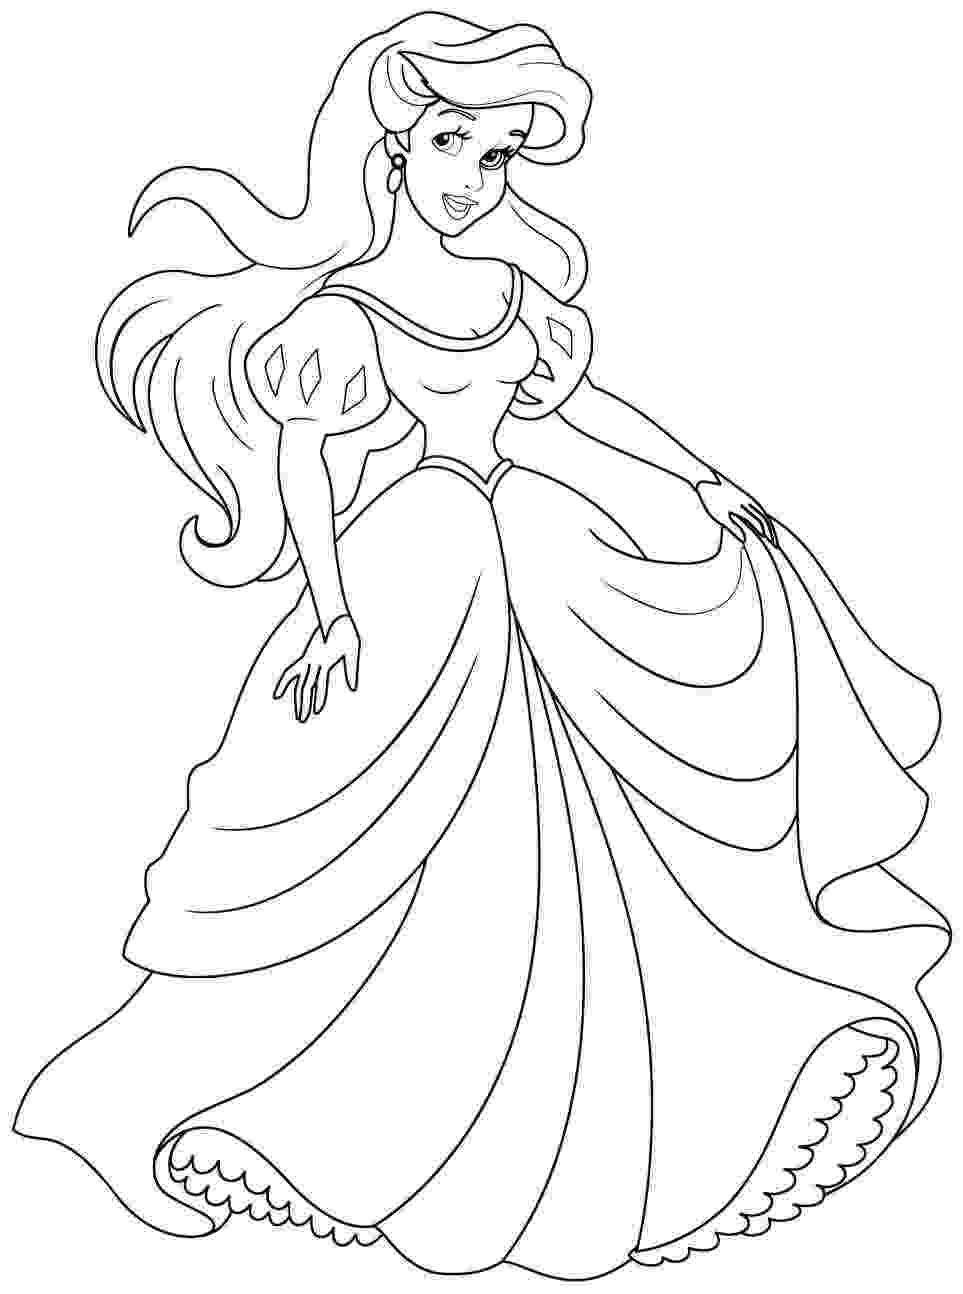 ariel coloring page ariel coloring pages to download and print for free ariel page coloring 1 1